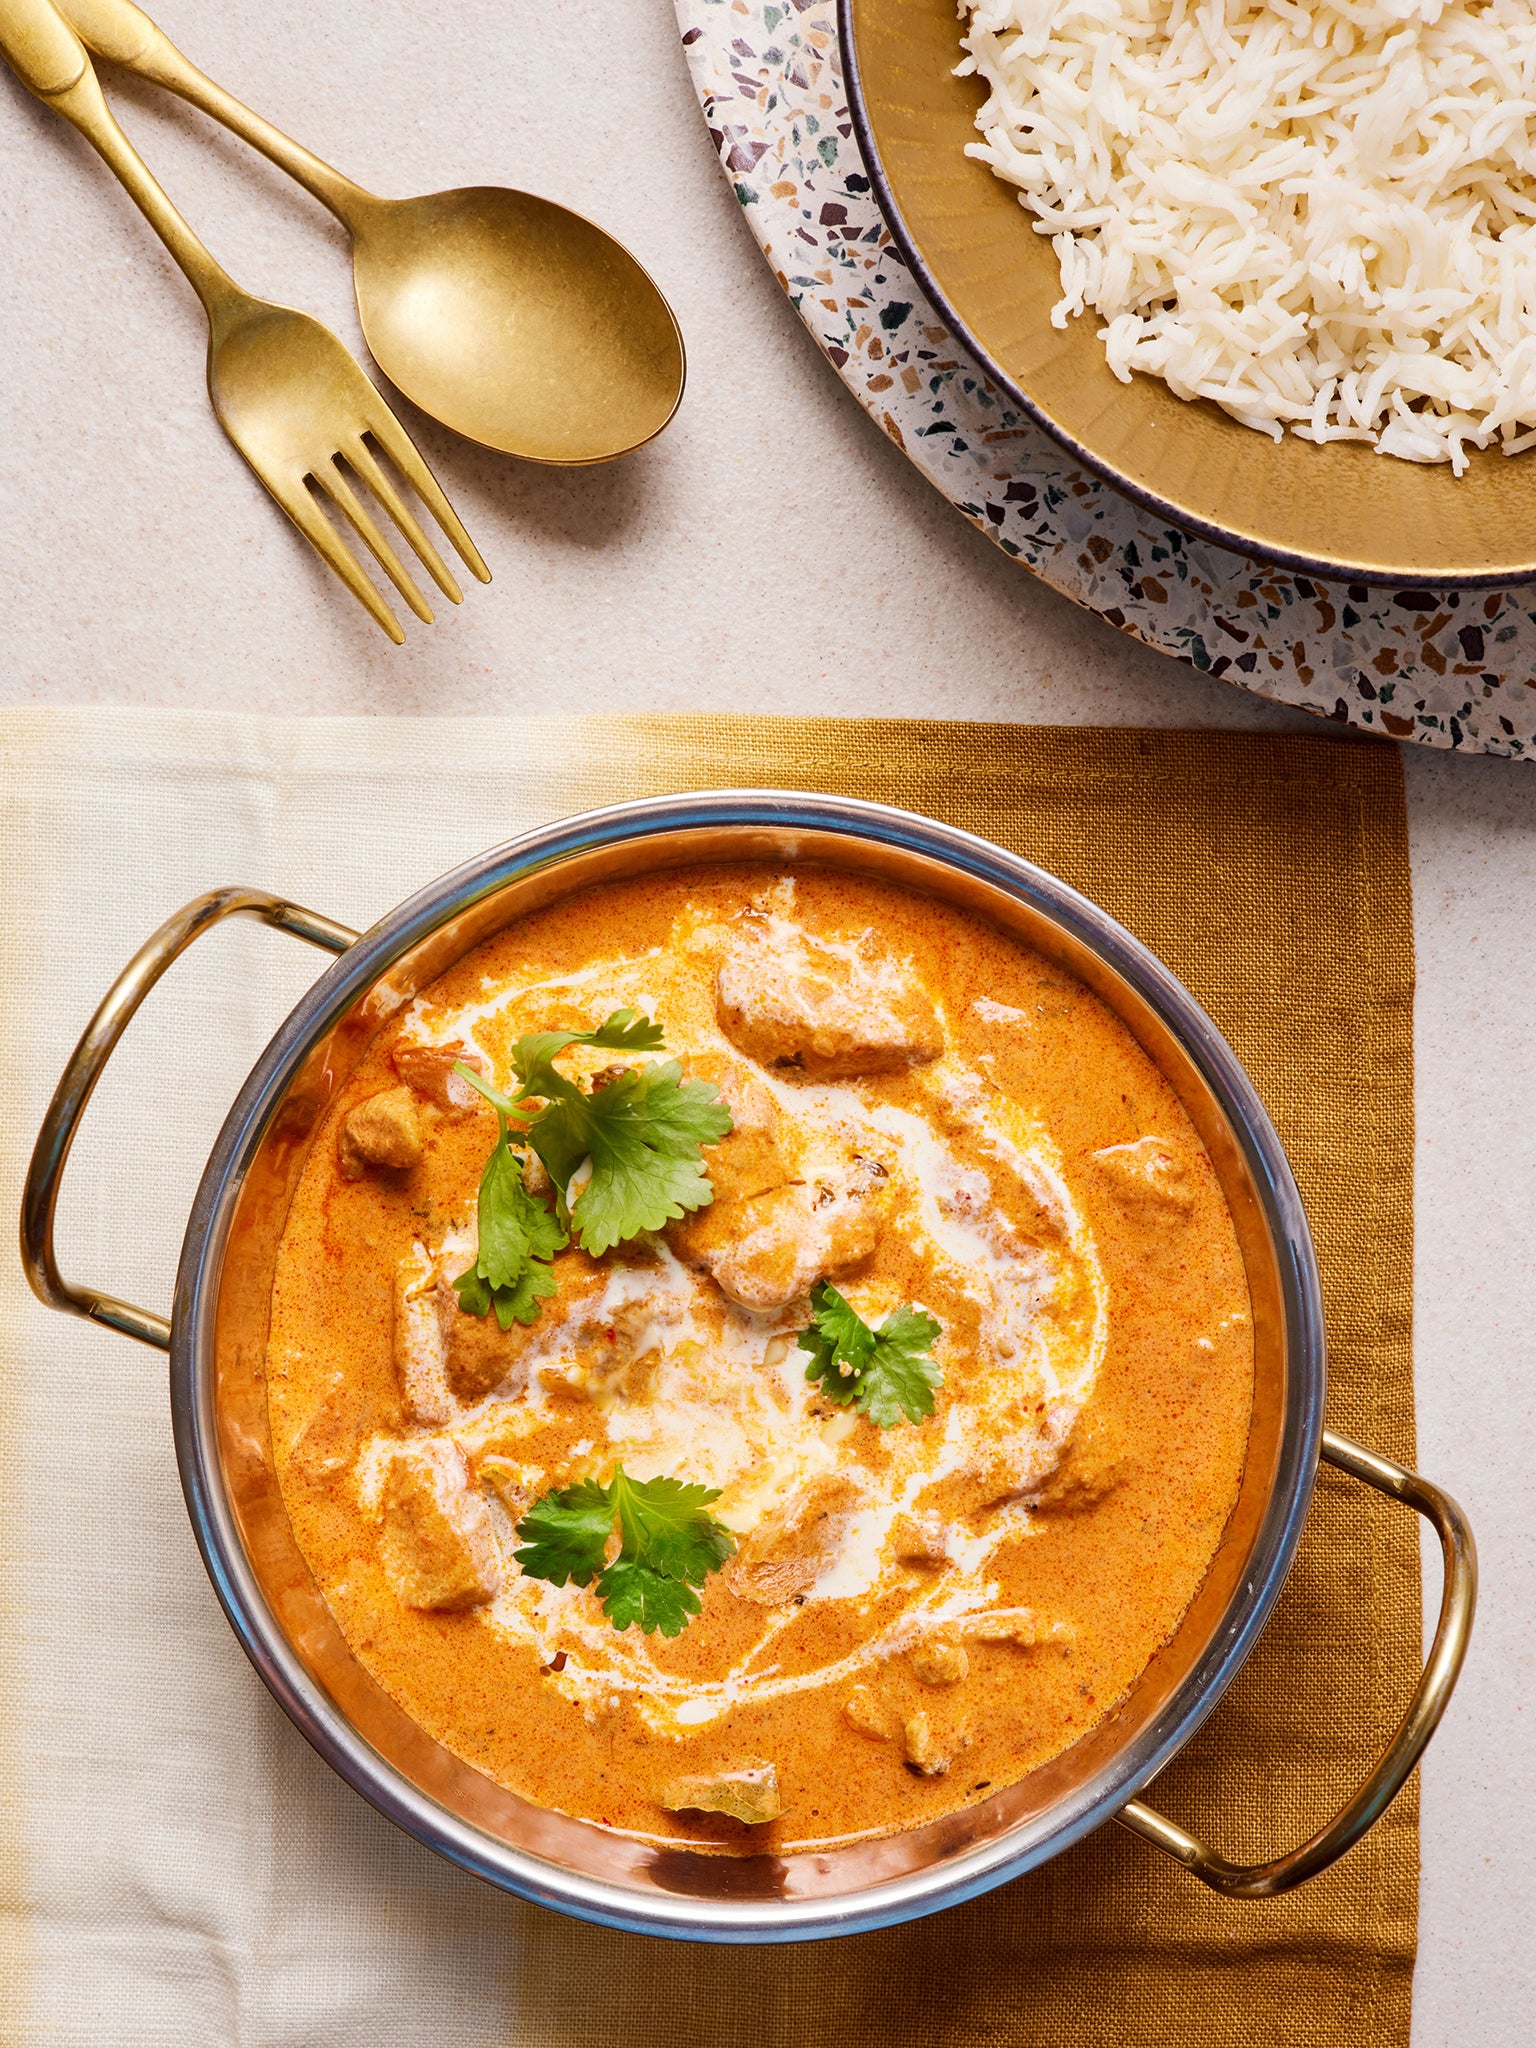 Creamy and delicious, this is a crowd-pleasing curry